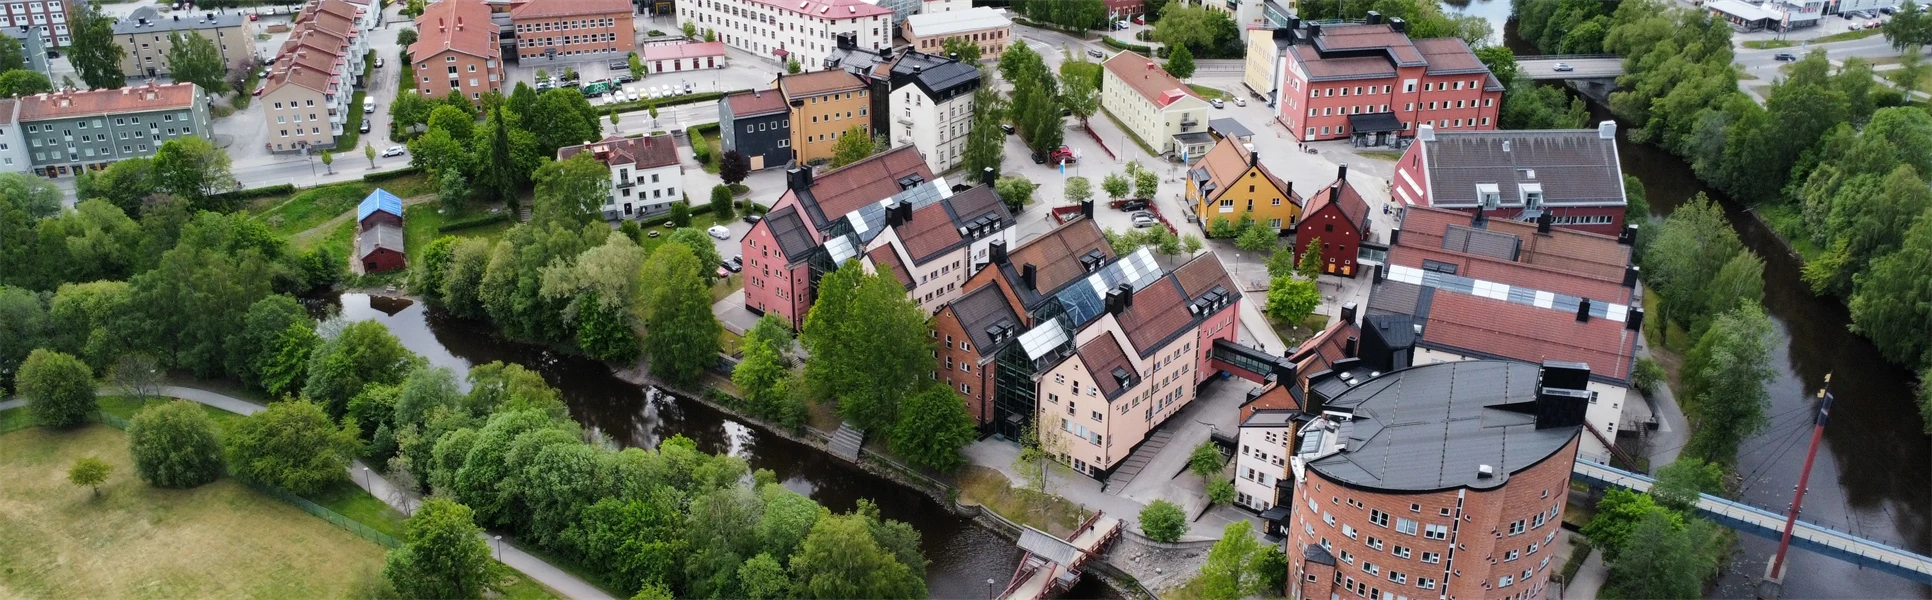 Drone image of Campus Sundsvall showing different buildings that have different designs and colours.